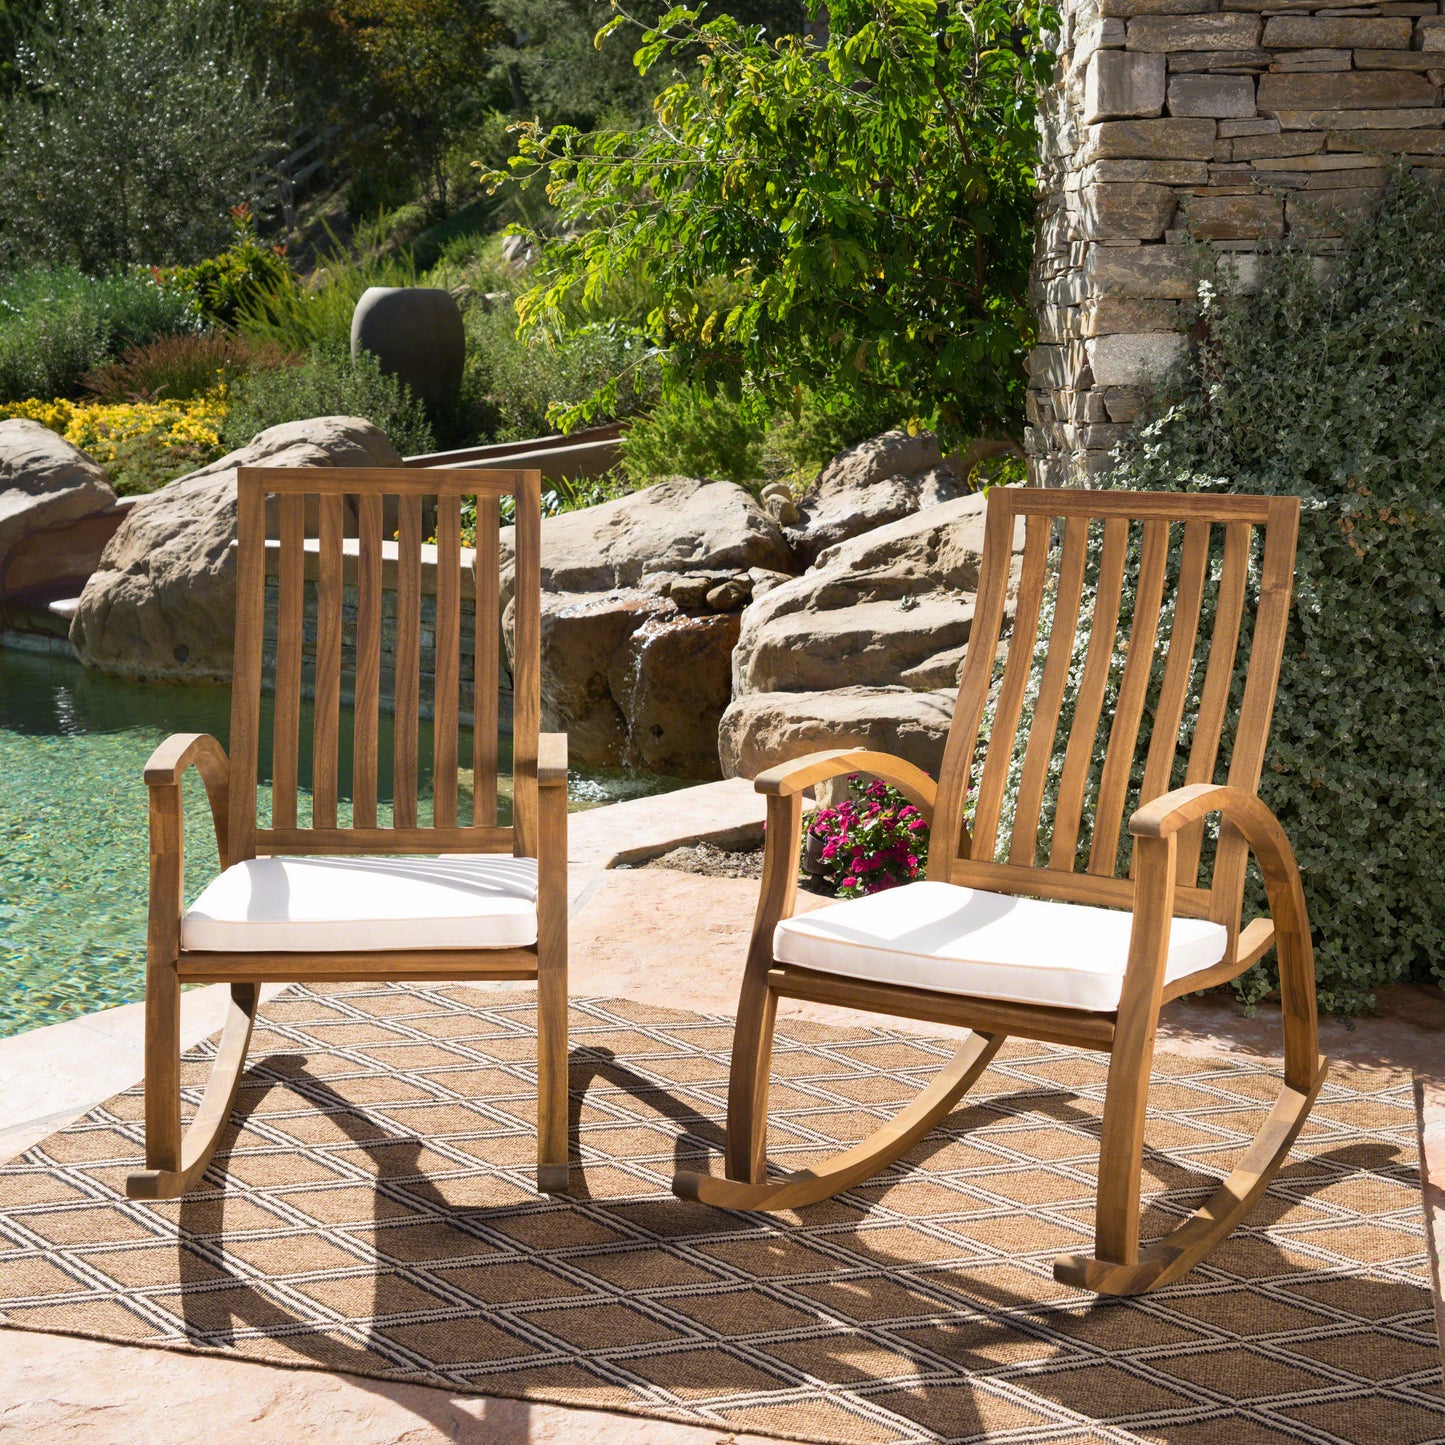 Cattan Outdoor Acacia Wood Rocking Chair with Water Resistant Cushions - Set of 2